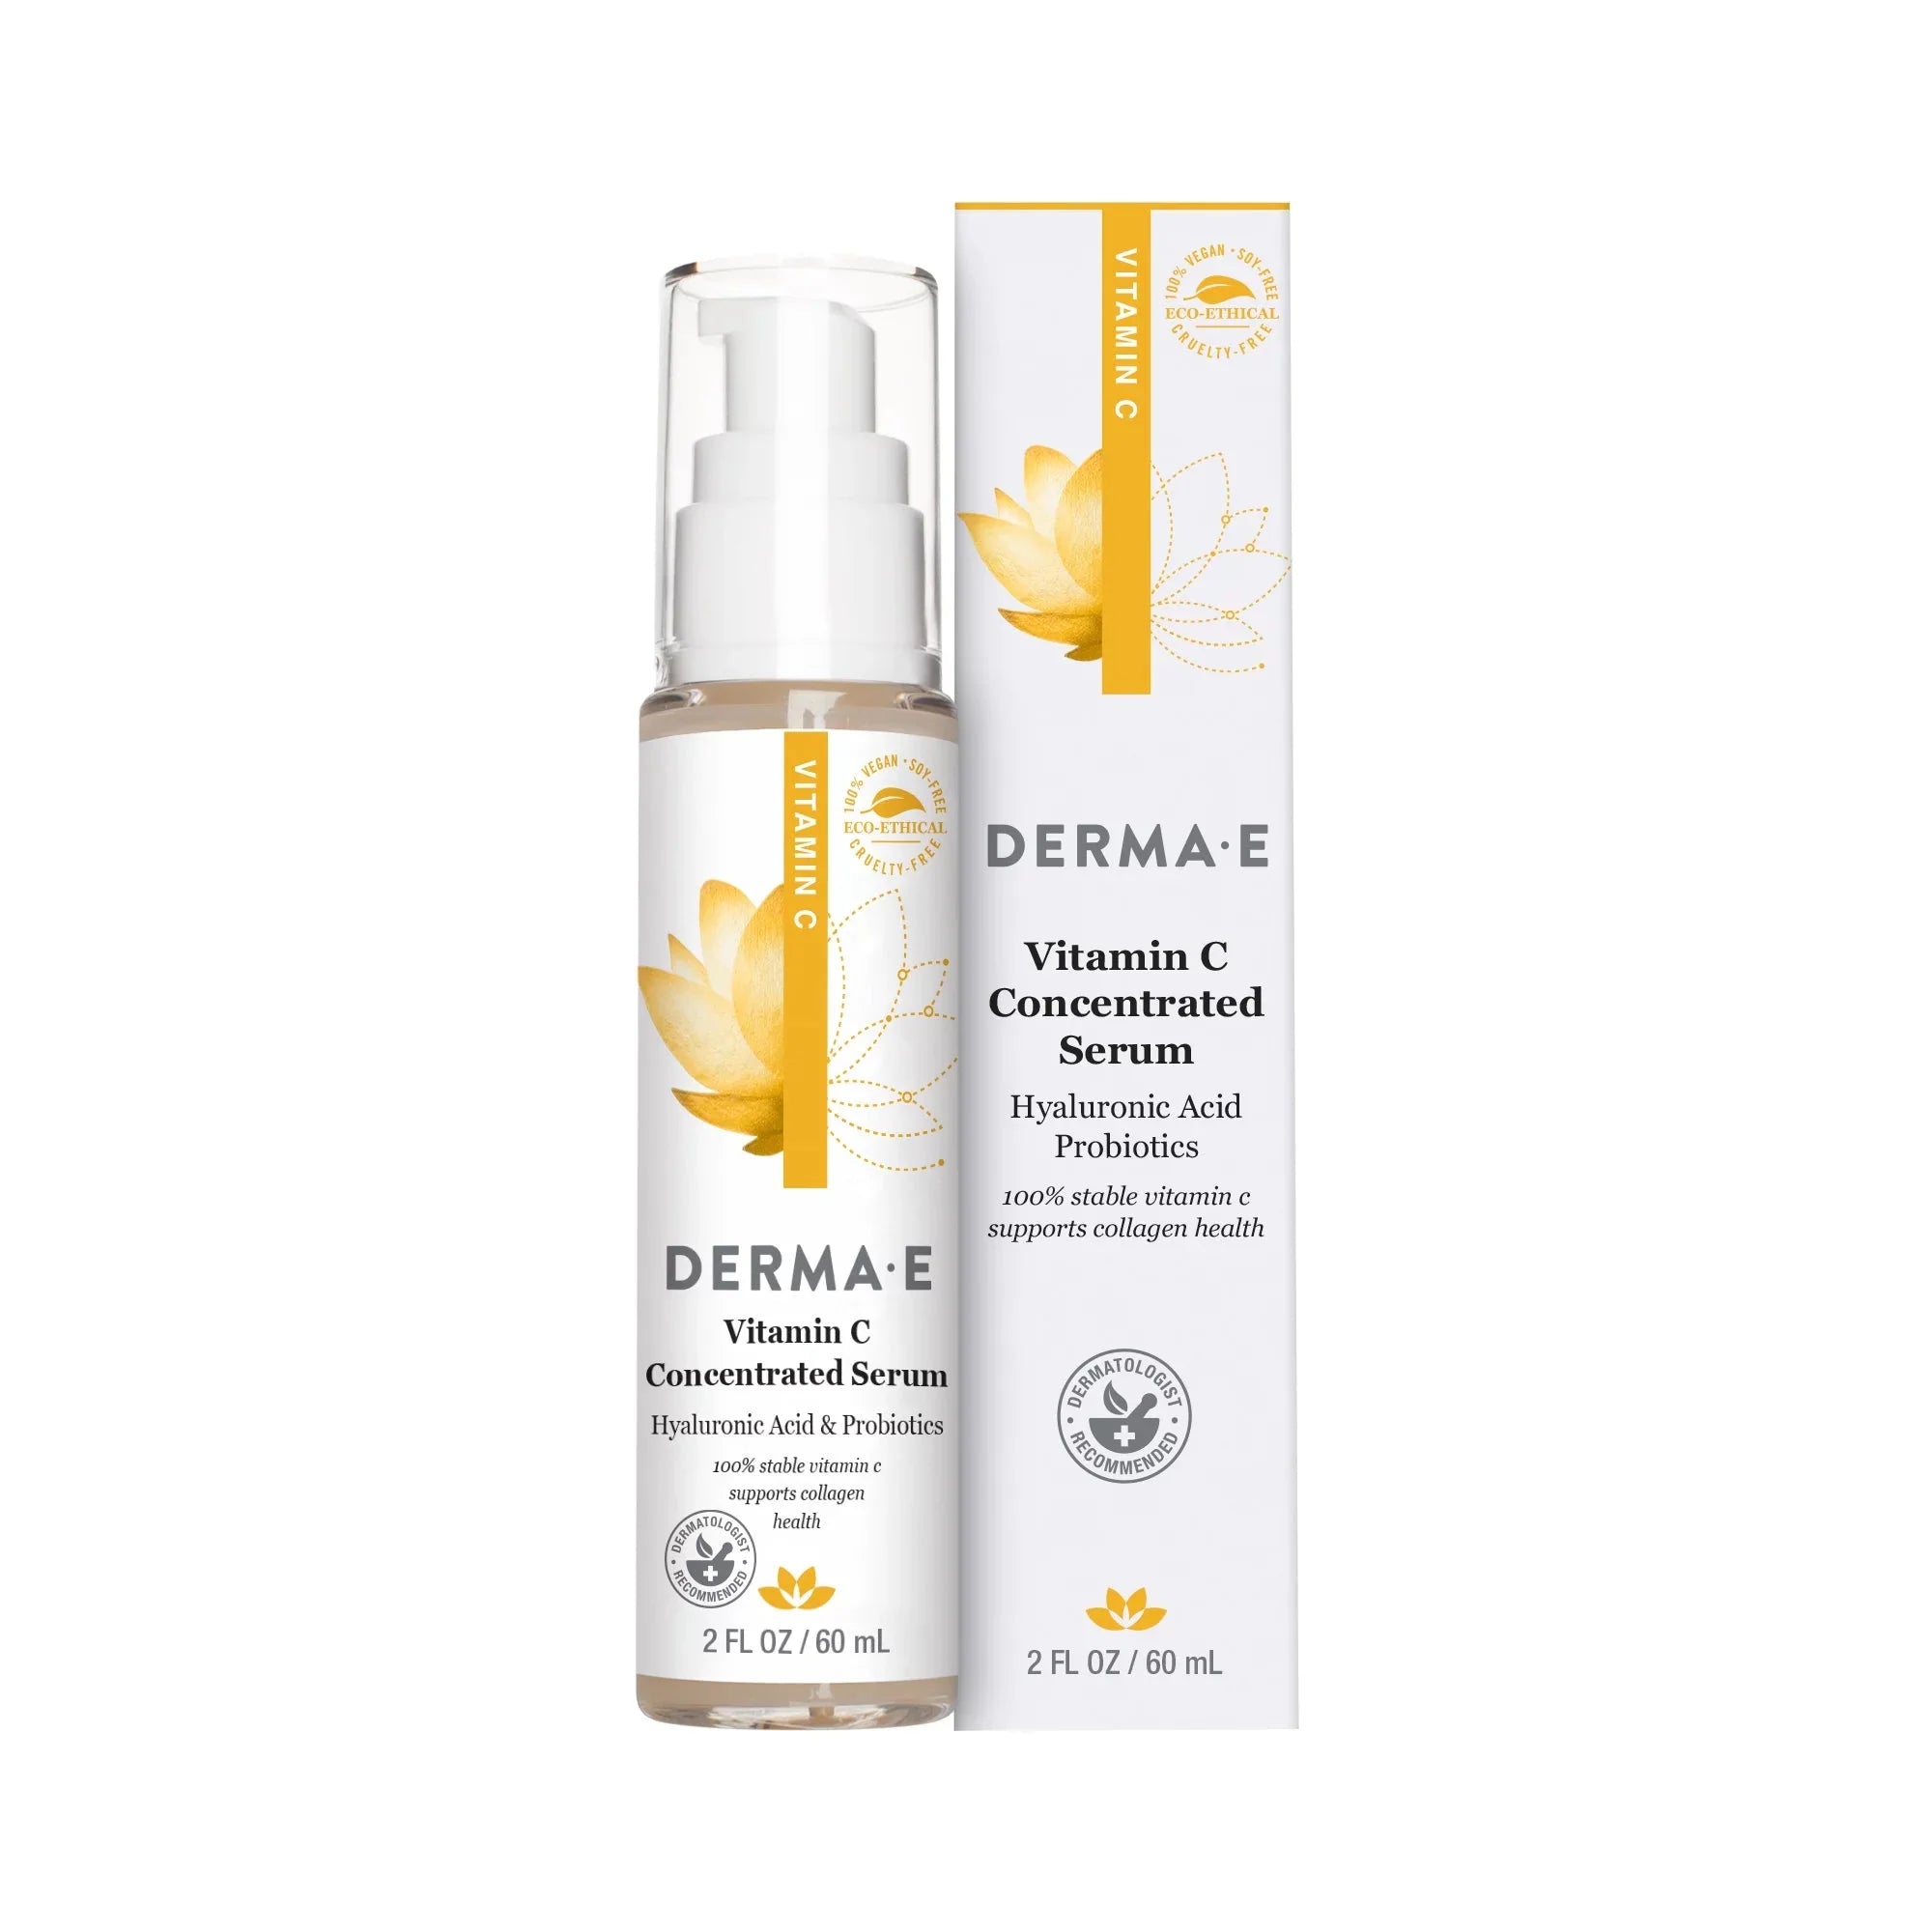 Wholesale prices with free shipping all over United States DERMA E Vitamin C Serum for Face with Hyaluronic Acid, Concentrated Brightening Serum, Vegan, 2 oz - Steven Deals